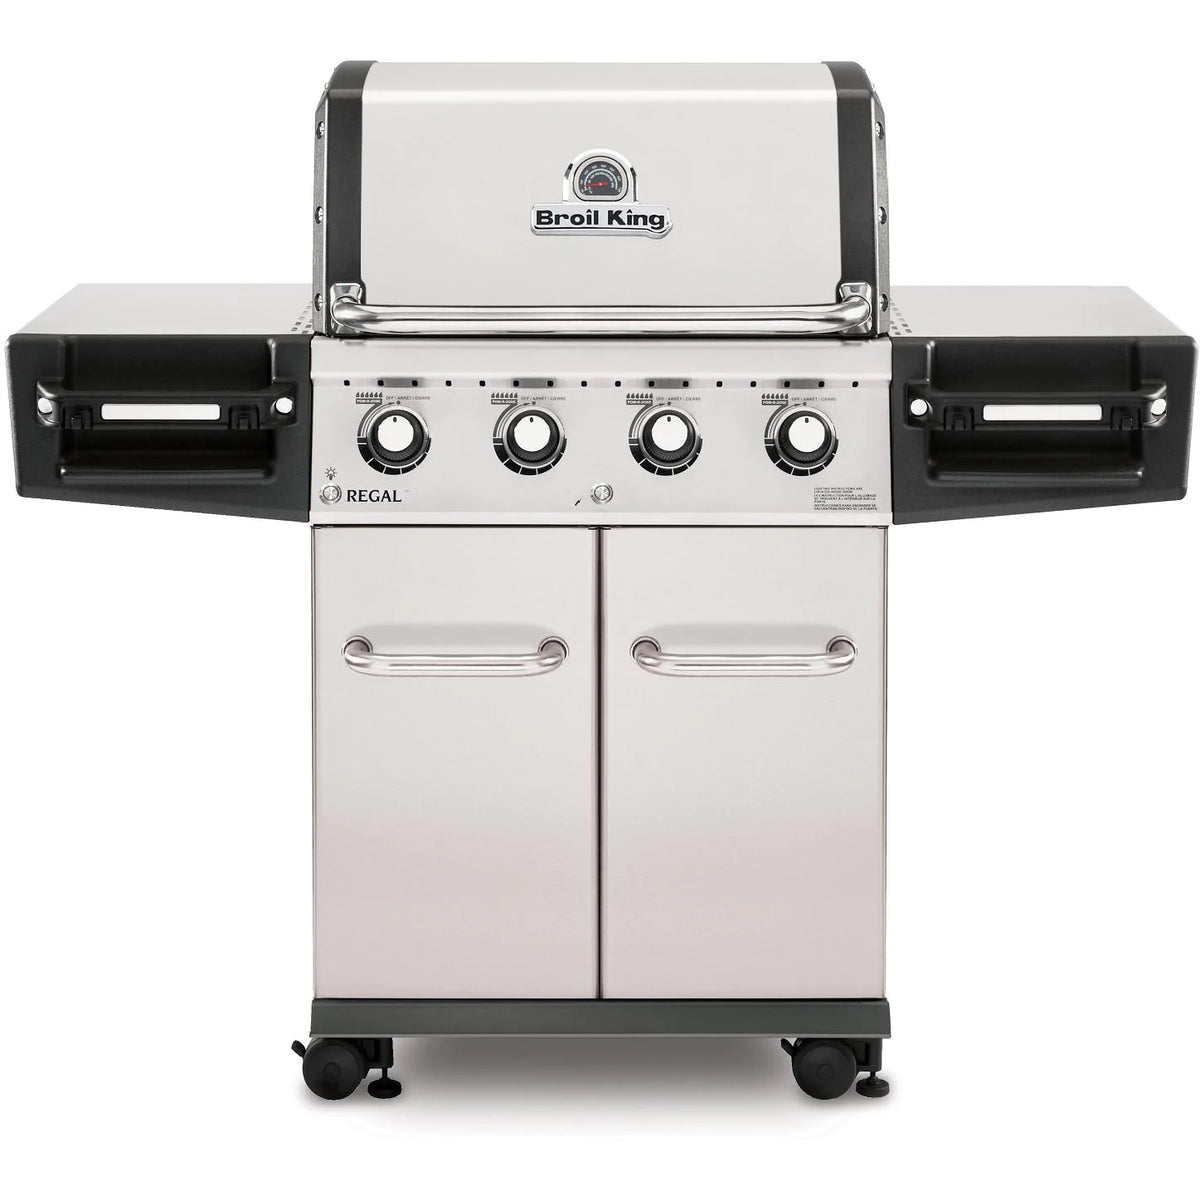 Broil King Regal S420 Pro 4-Burner Freestanding Natural Gas Grill - Stainless Steel